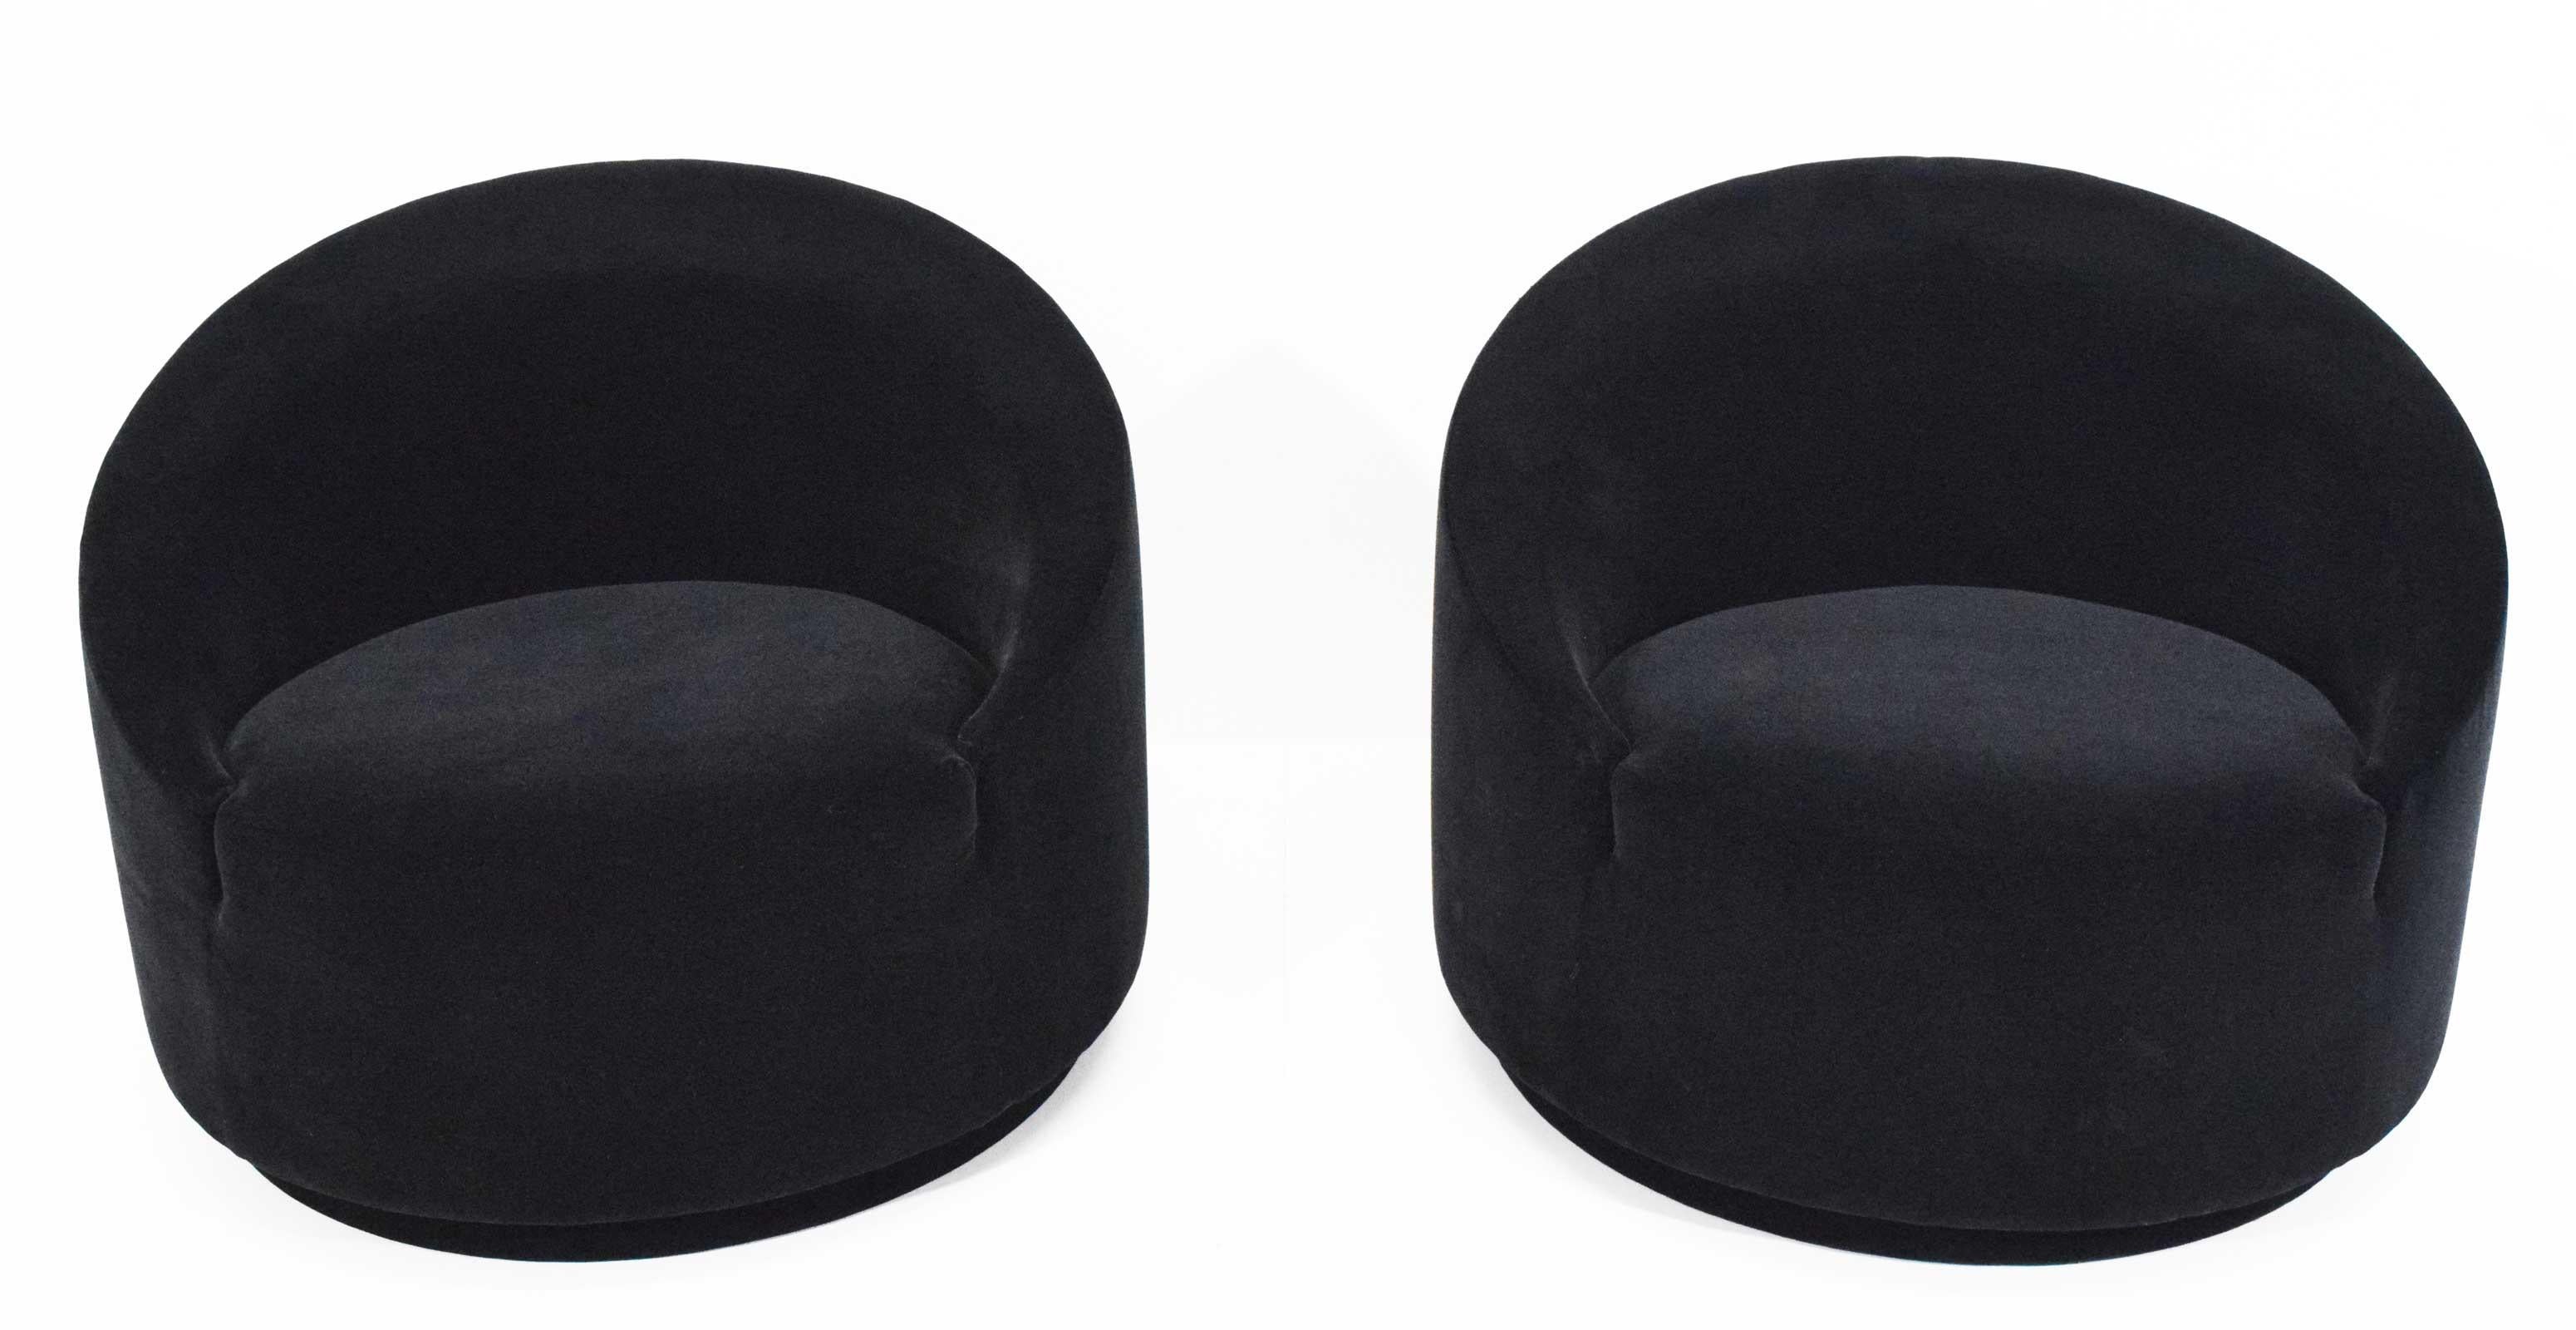 A really very nice pair of cool looking swivel tub chairs upholstered in black mohair by Maharm.